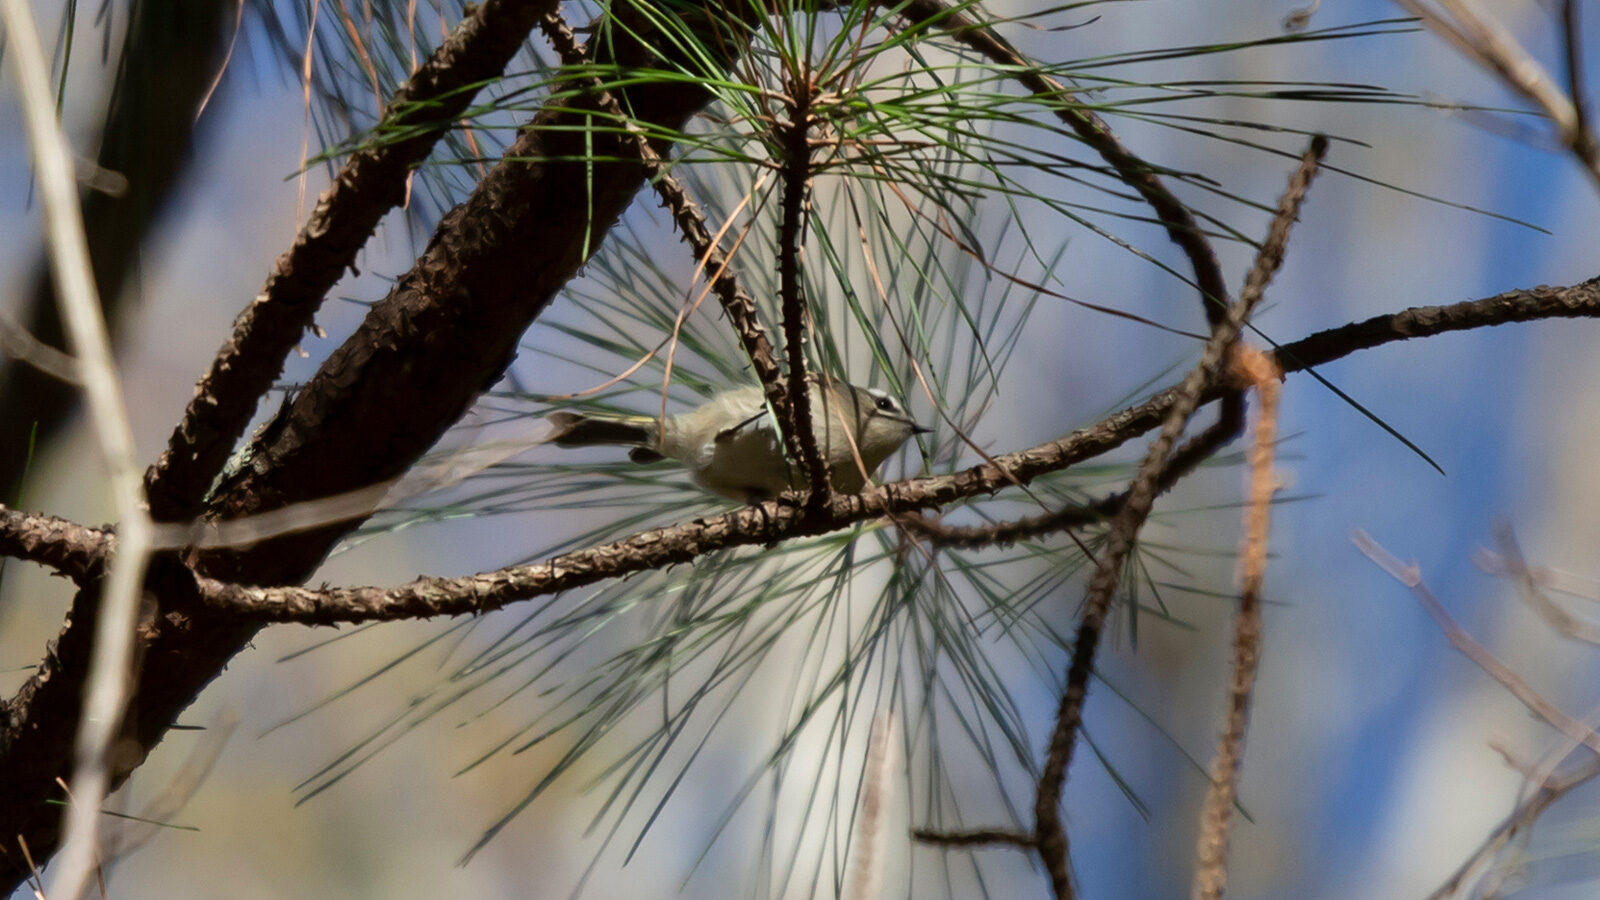 Golden-crowned kinglet standing on a limb